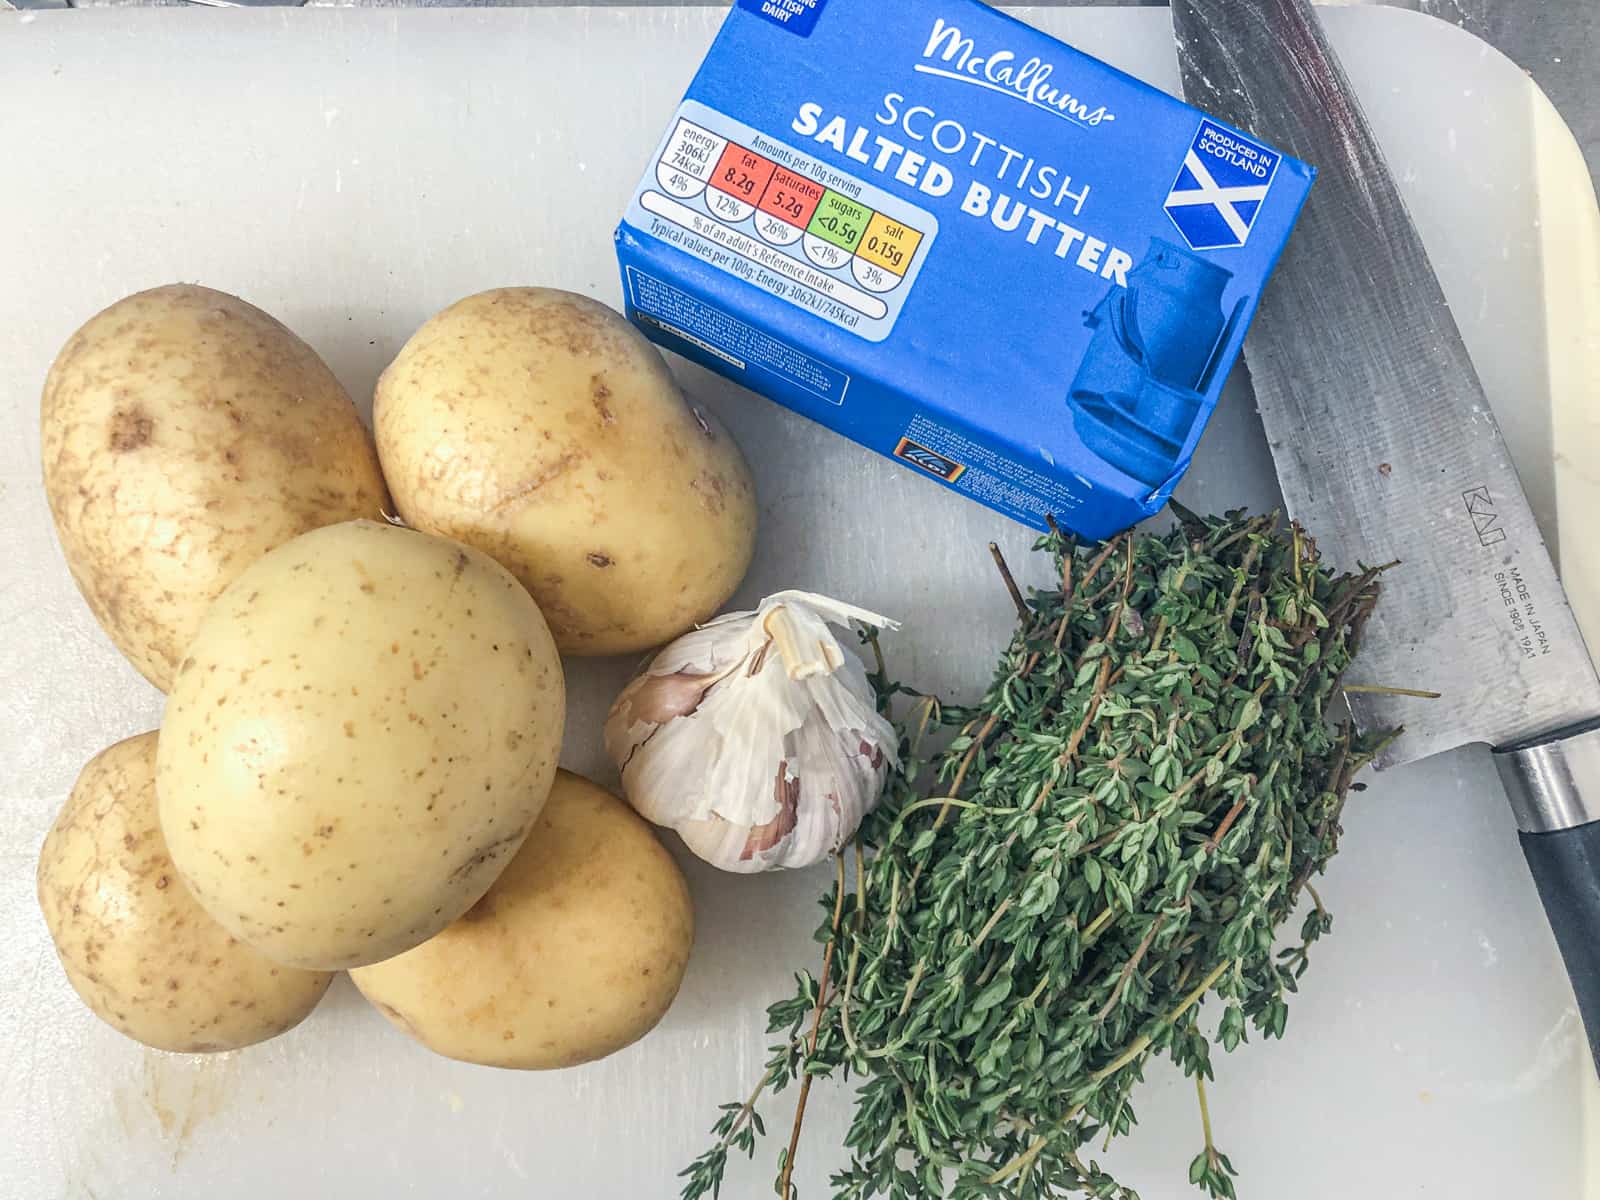 Ingredients to make fondant potatoes on a chopping board consisting of potatoes, fresh thyme, garlic and salted butter.